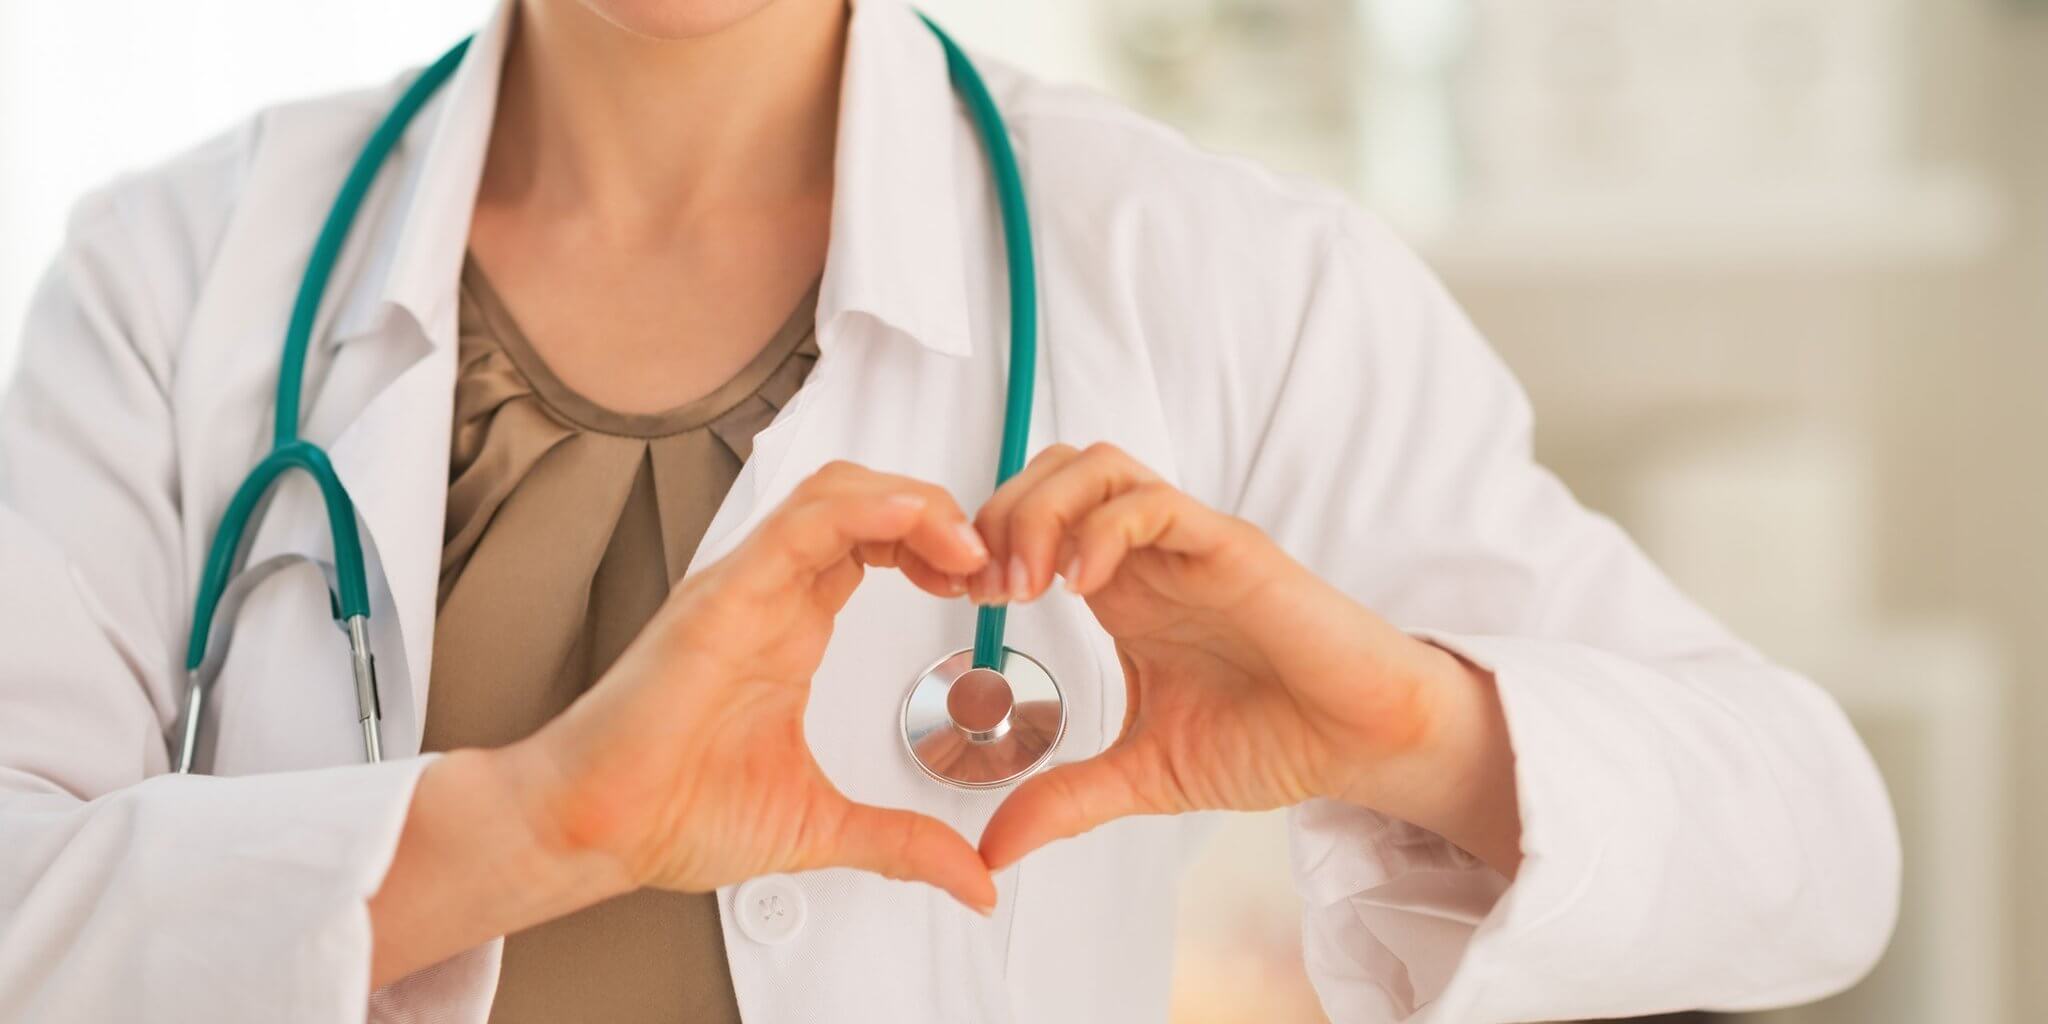 Image of female doctor wearing lab coat and stethoscope holding hands in a heart